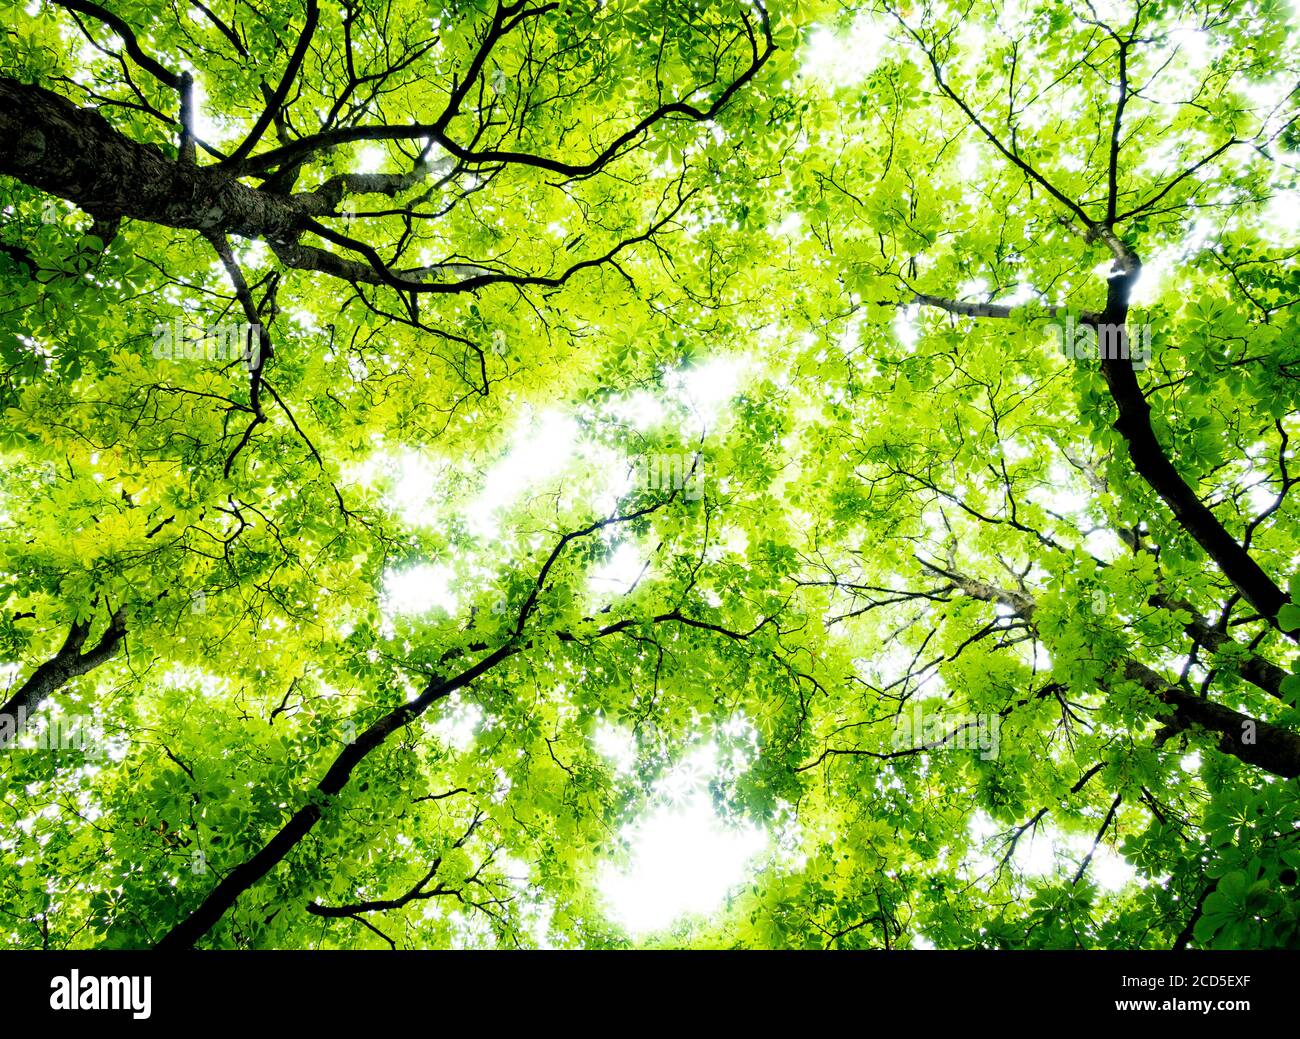 Landscape with low angle view of green trees in forest Stock Photo